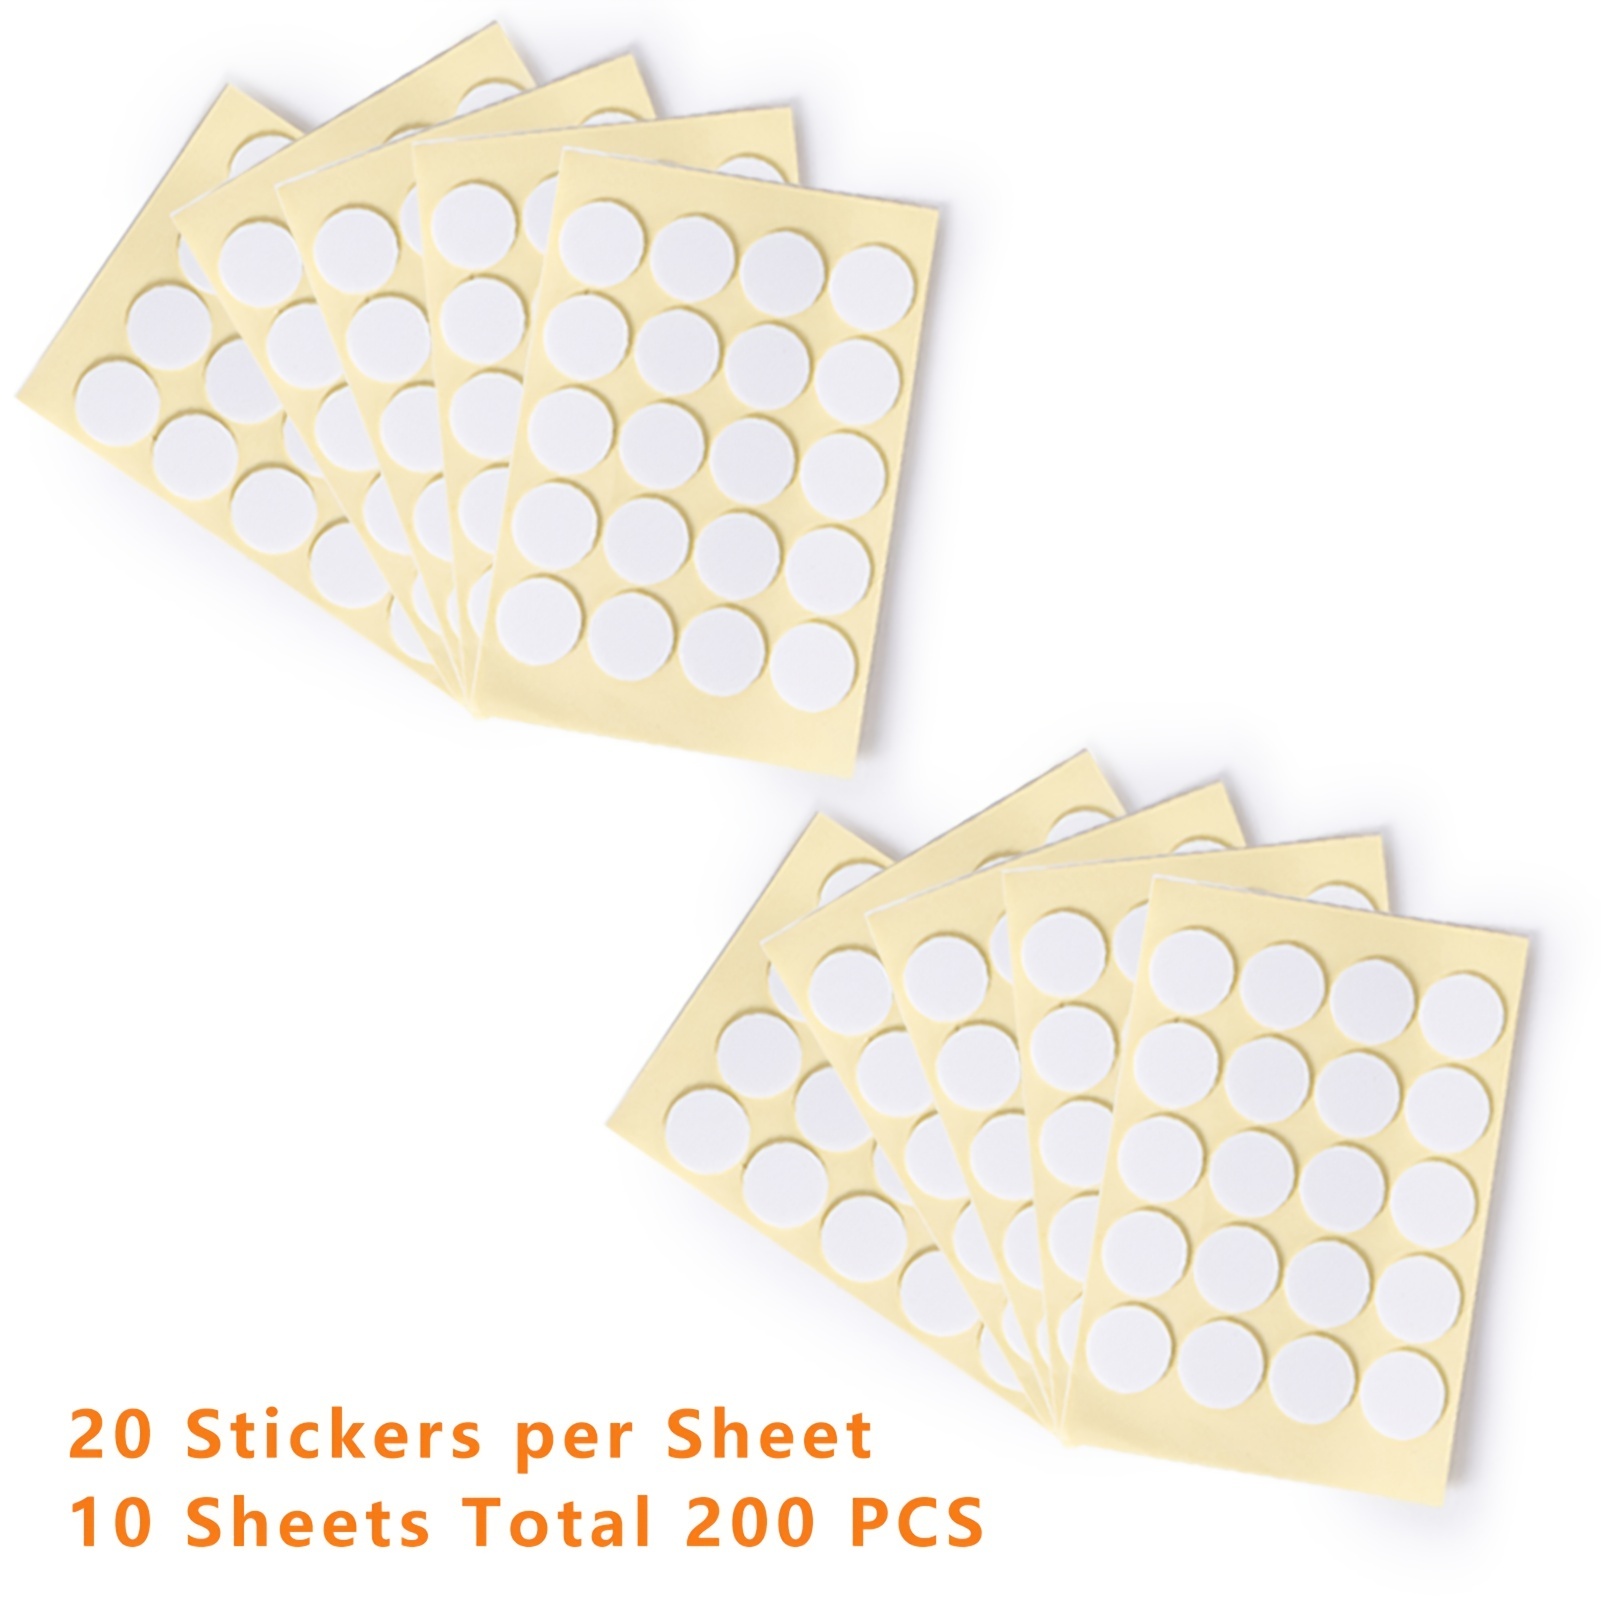  1120 Pieces 20 Sheets Candle Wick Stickers 15 mm Candle Making  Sticker Double-Sided Heat Resistance Stickers Hot Wax Wick Stickers for Candle  Making